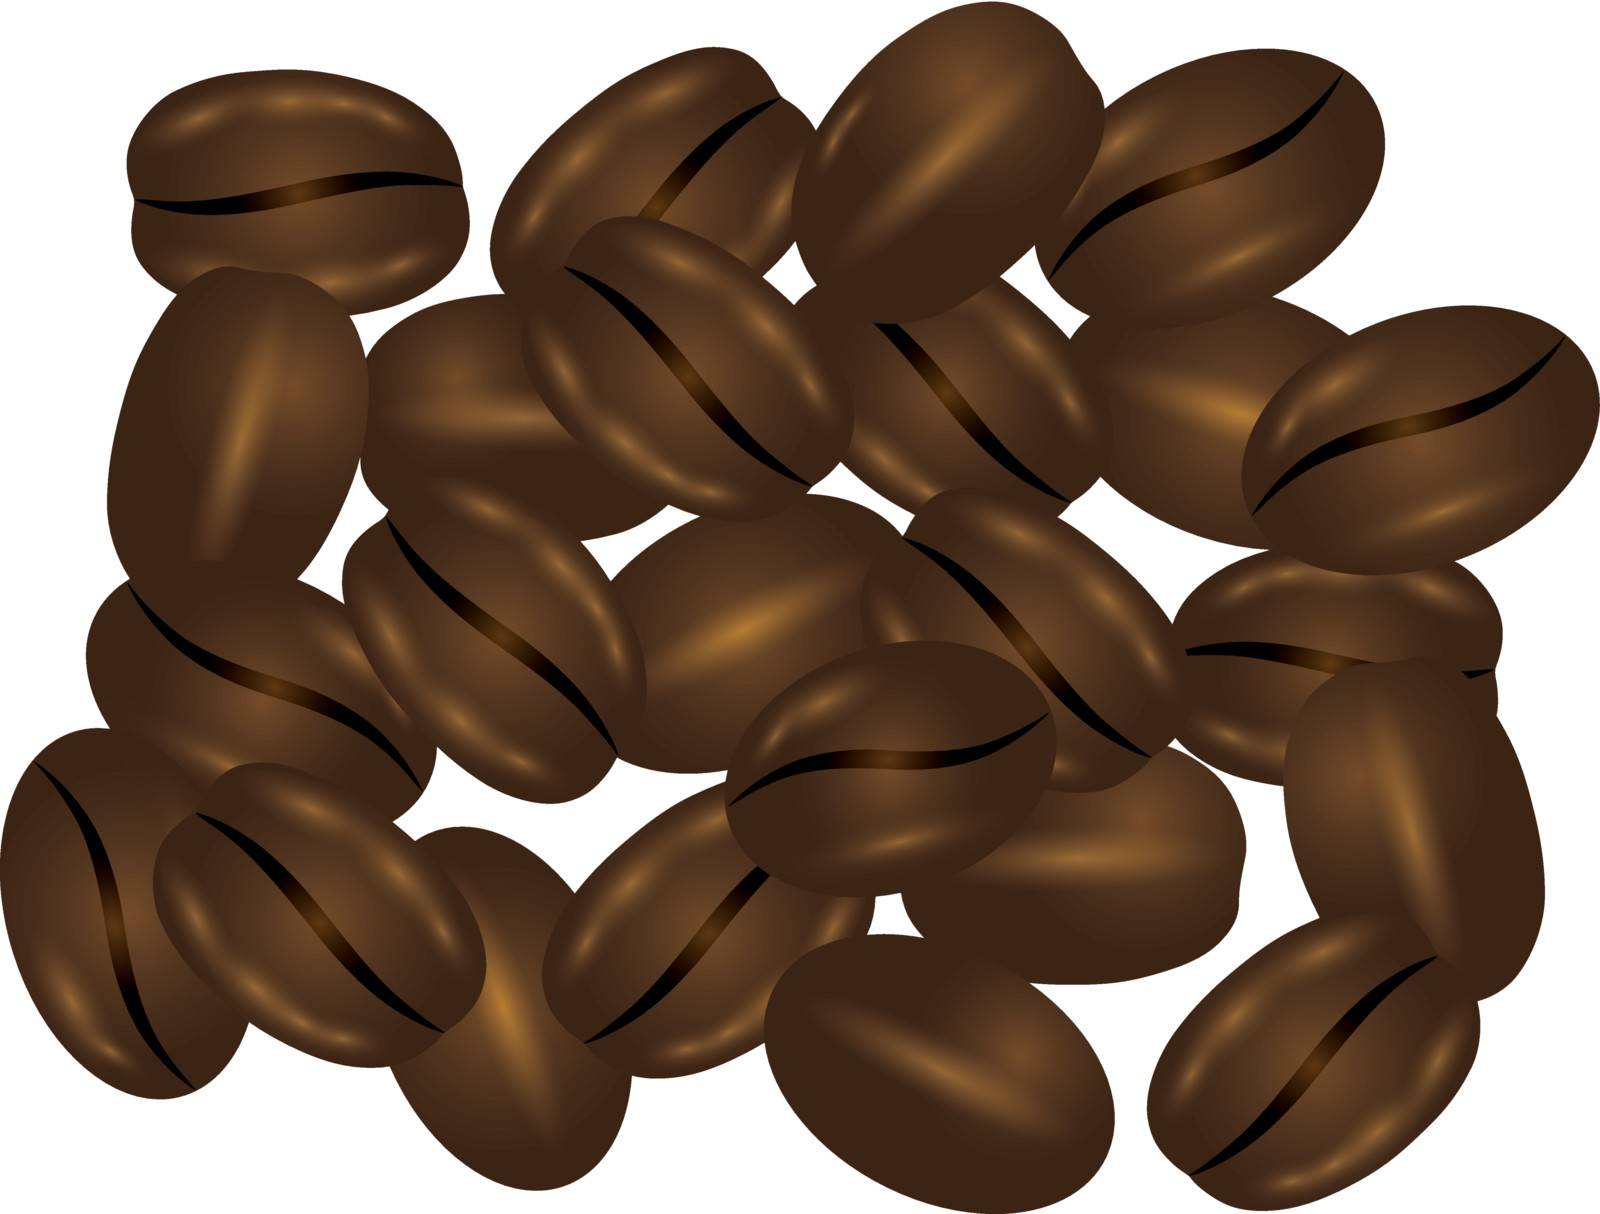 Coffee Beans Isolated on White Background Illustration